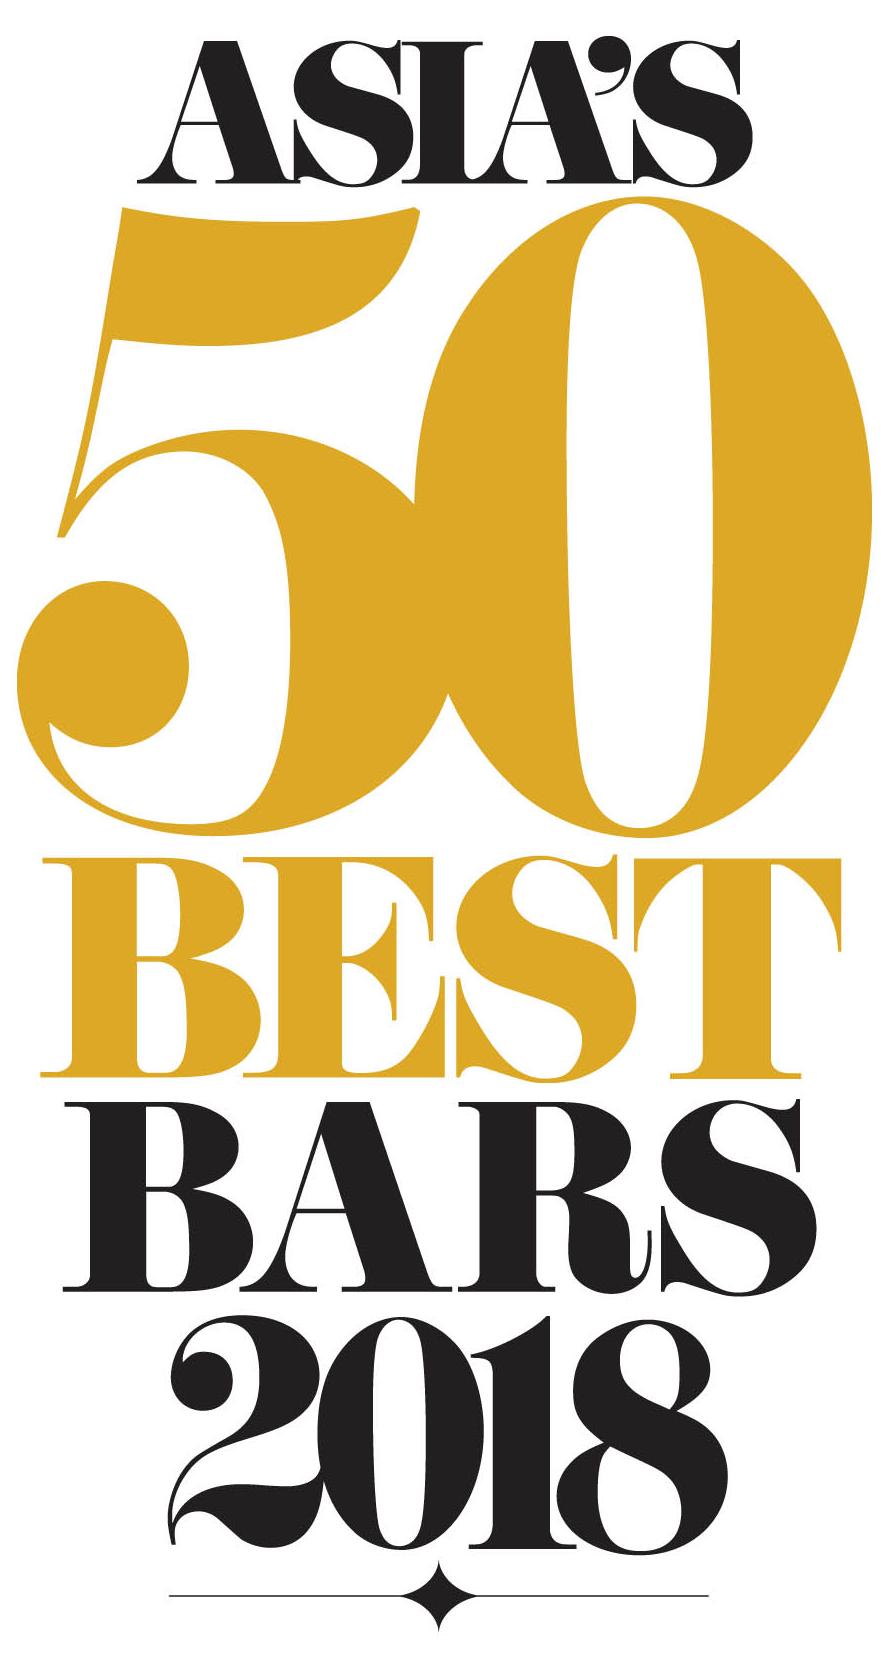 Asia s 50 Best Bars to host first ever awards ceremony in Singapore The third edition of the list will be revealed on 3 rd May 2018 February 2018, Singapore Asia s 50 Best Bars has chosen Singapore